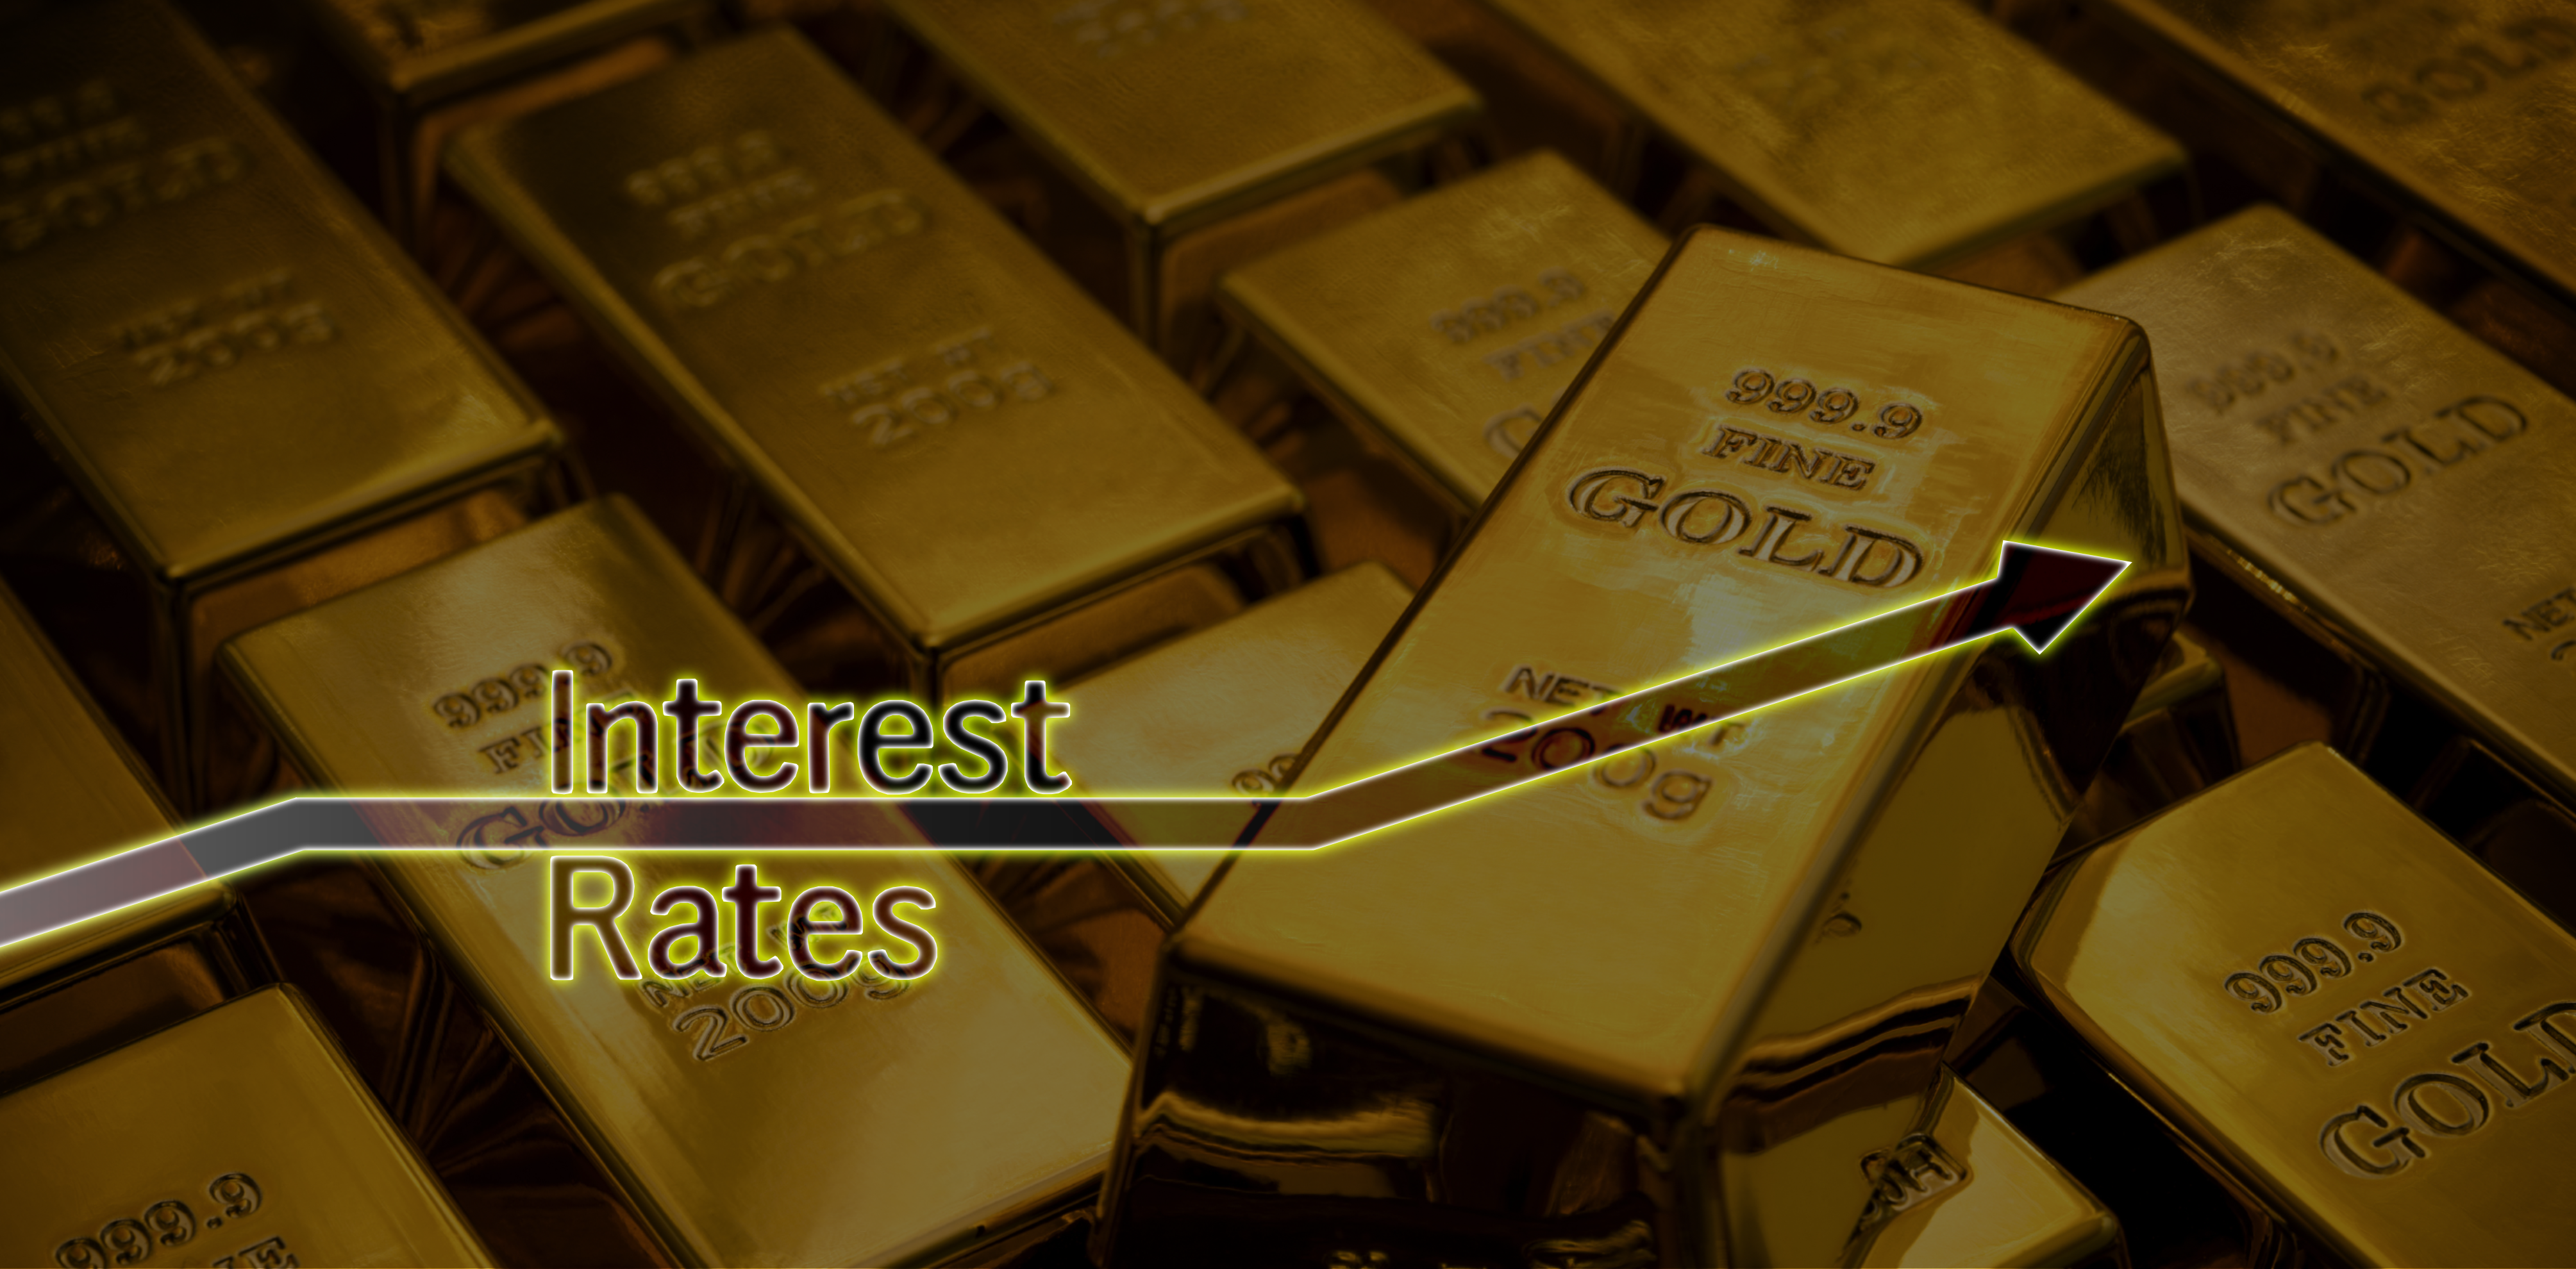 GoldCore: Fed Raised Rates 0.25% – Rising Rates Positive For Gold